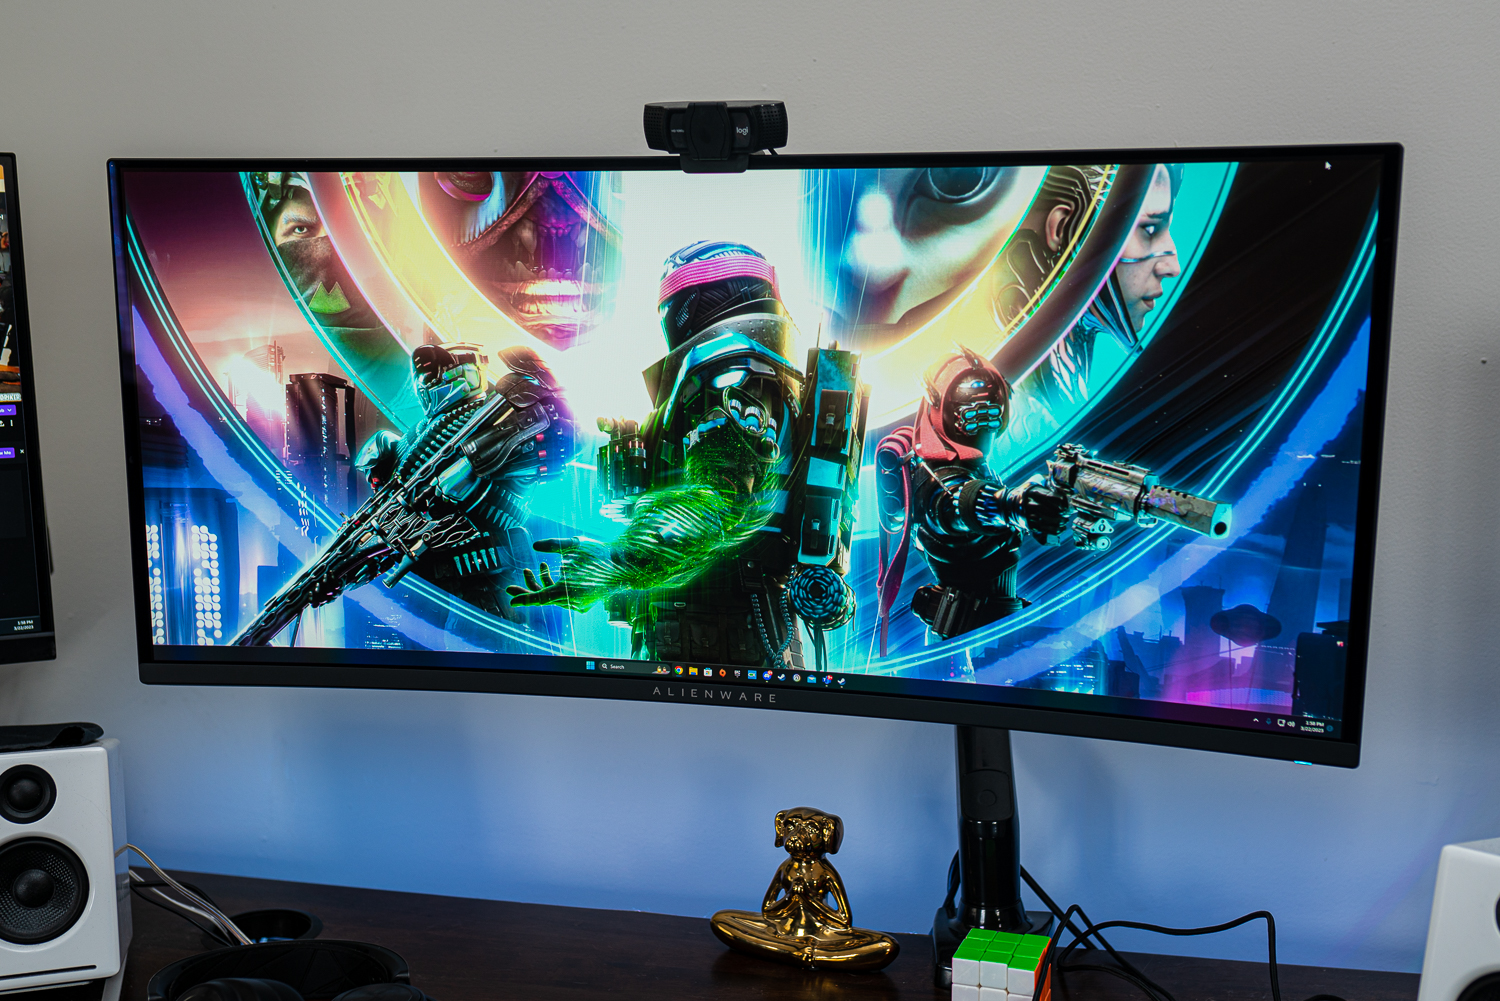 Rtings latest OLED monitor burn-in tests are not good news for Samsung